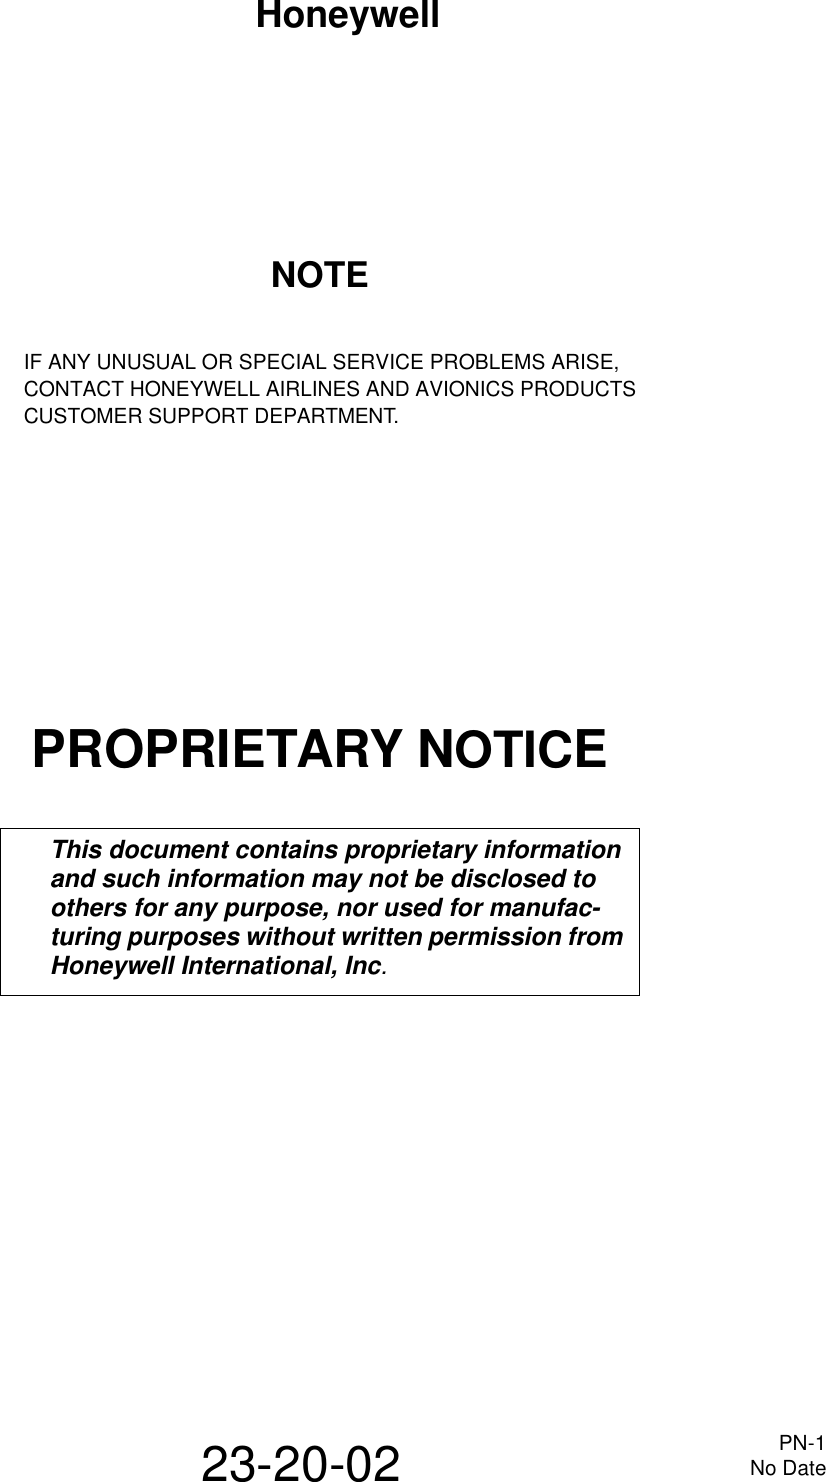 HoneywellPN-1No Date23-20-02NOTEIF ANY UNUSUAL OR SPECIAL SERVICE PROBLEMS ARISE,CONTACT HONEYWELL AIRLINES AND AVIONICS PRODUCTSCUSTOMER SUPPORT DEPARTMENT.PROPRIETARY NOTICEThis document contains proprietary information and such information may not be disclosed to others for any purpose, nor used for manufac- turing purposes without written permission from Honeywell International, Inc.